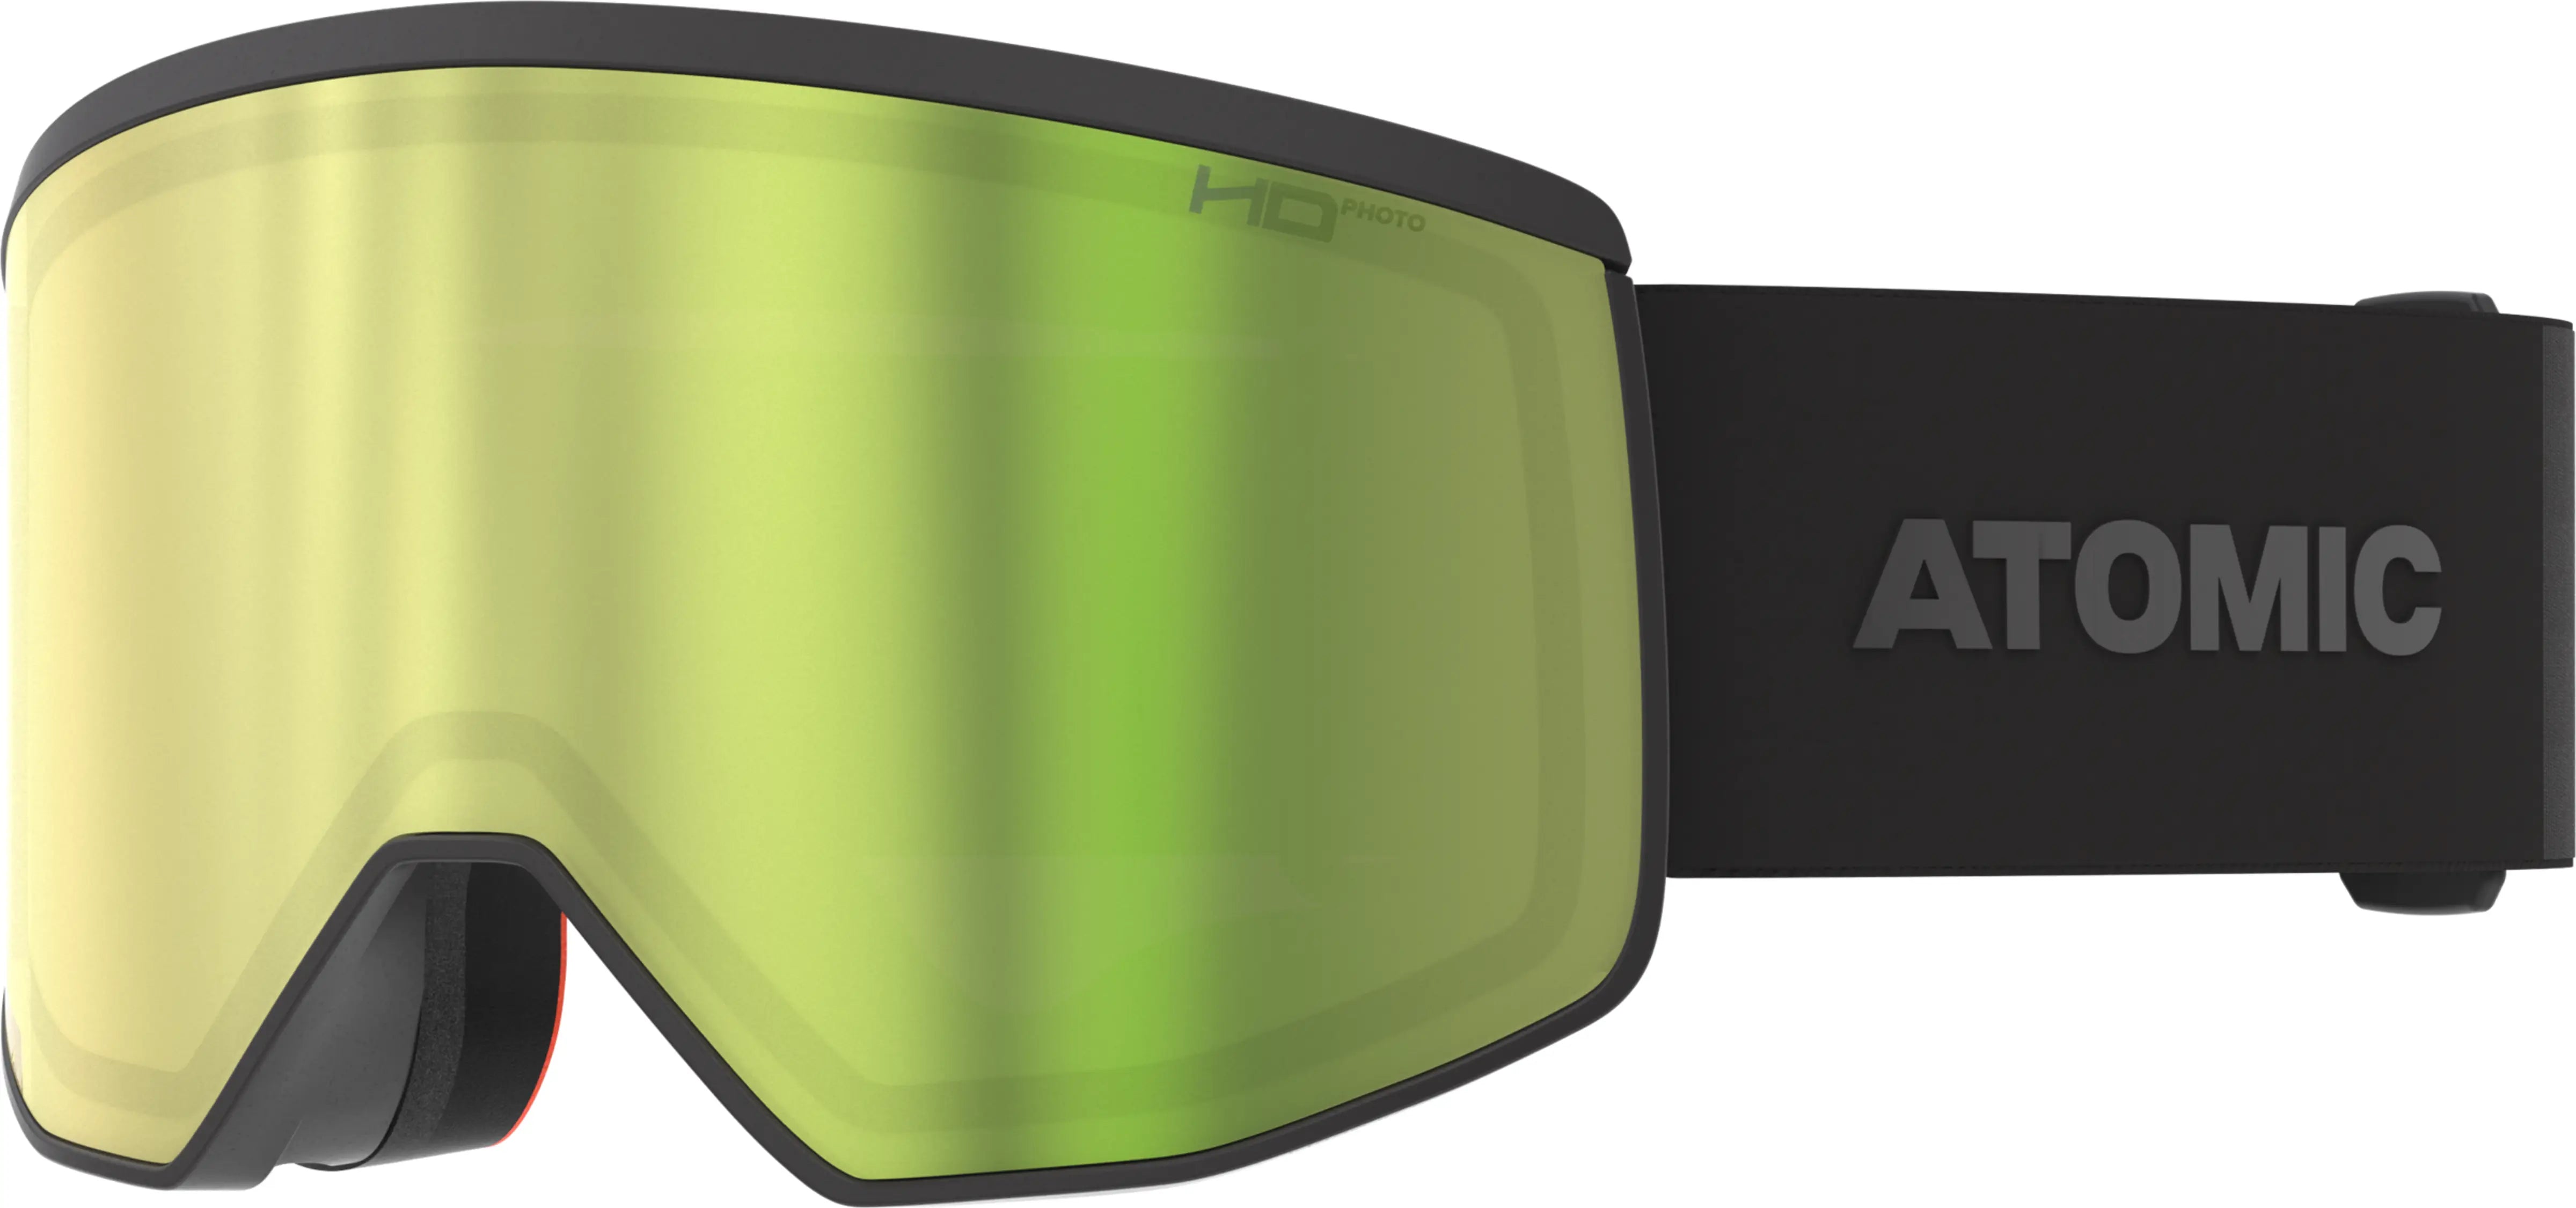 Made with 30 to 35% recycled materials, Atomic Four Pro HD PHOTO goggles will never let you down – whatever the weather and wherever you find yourself. 